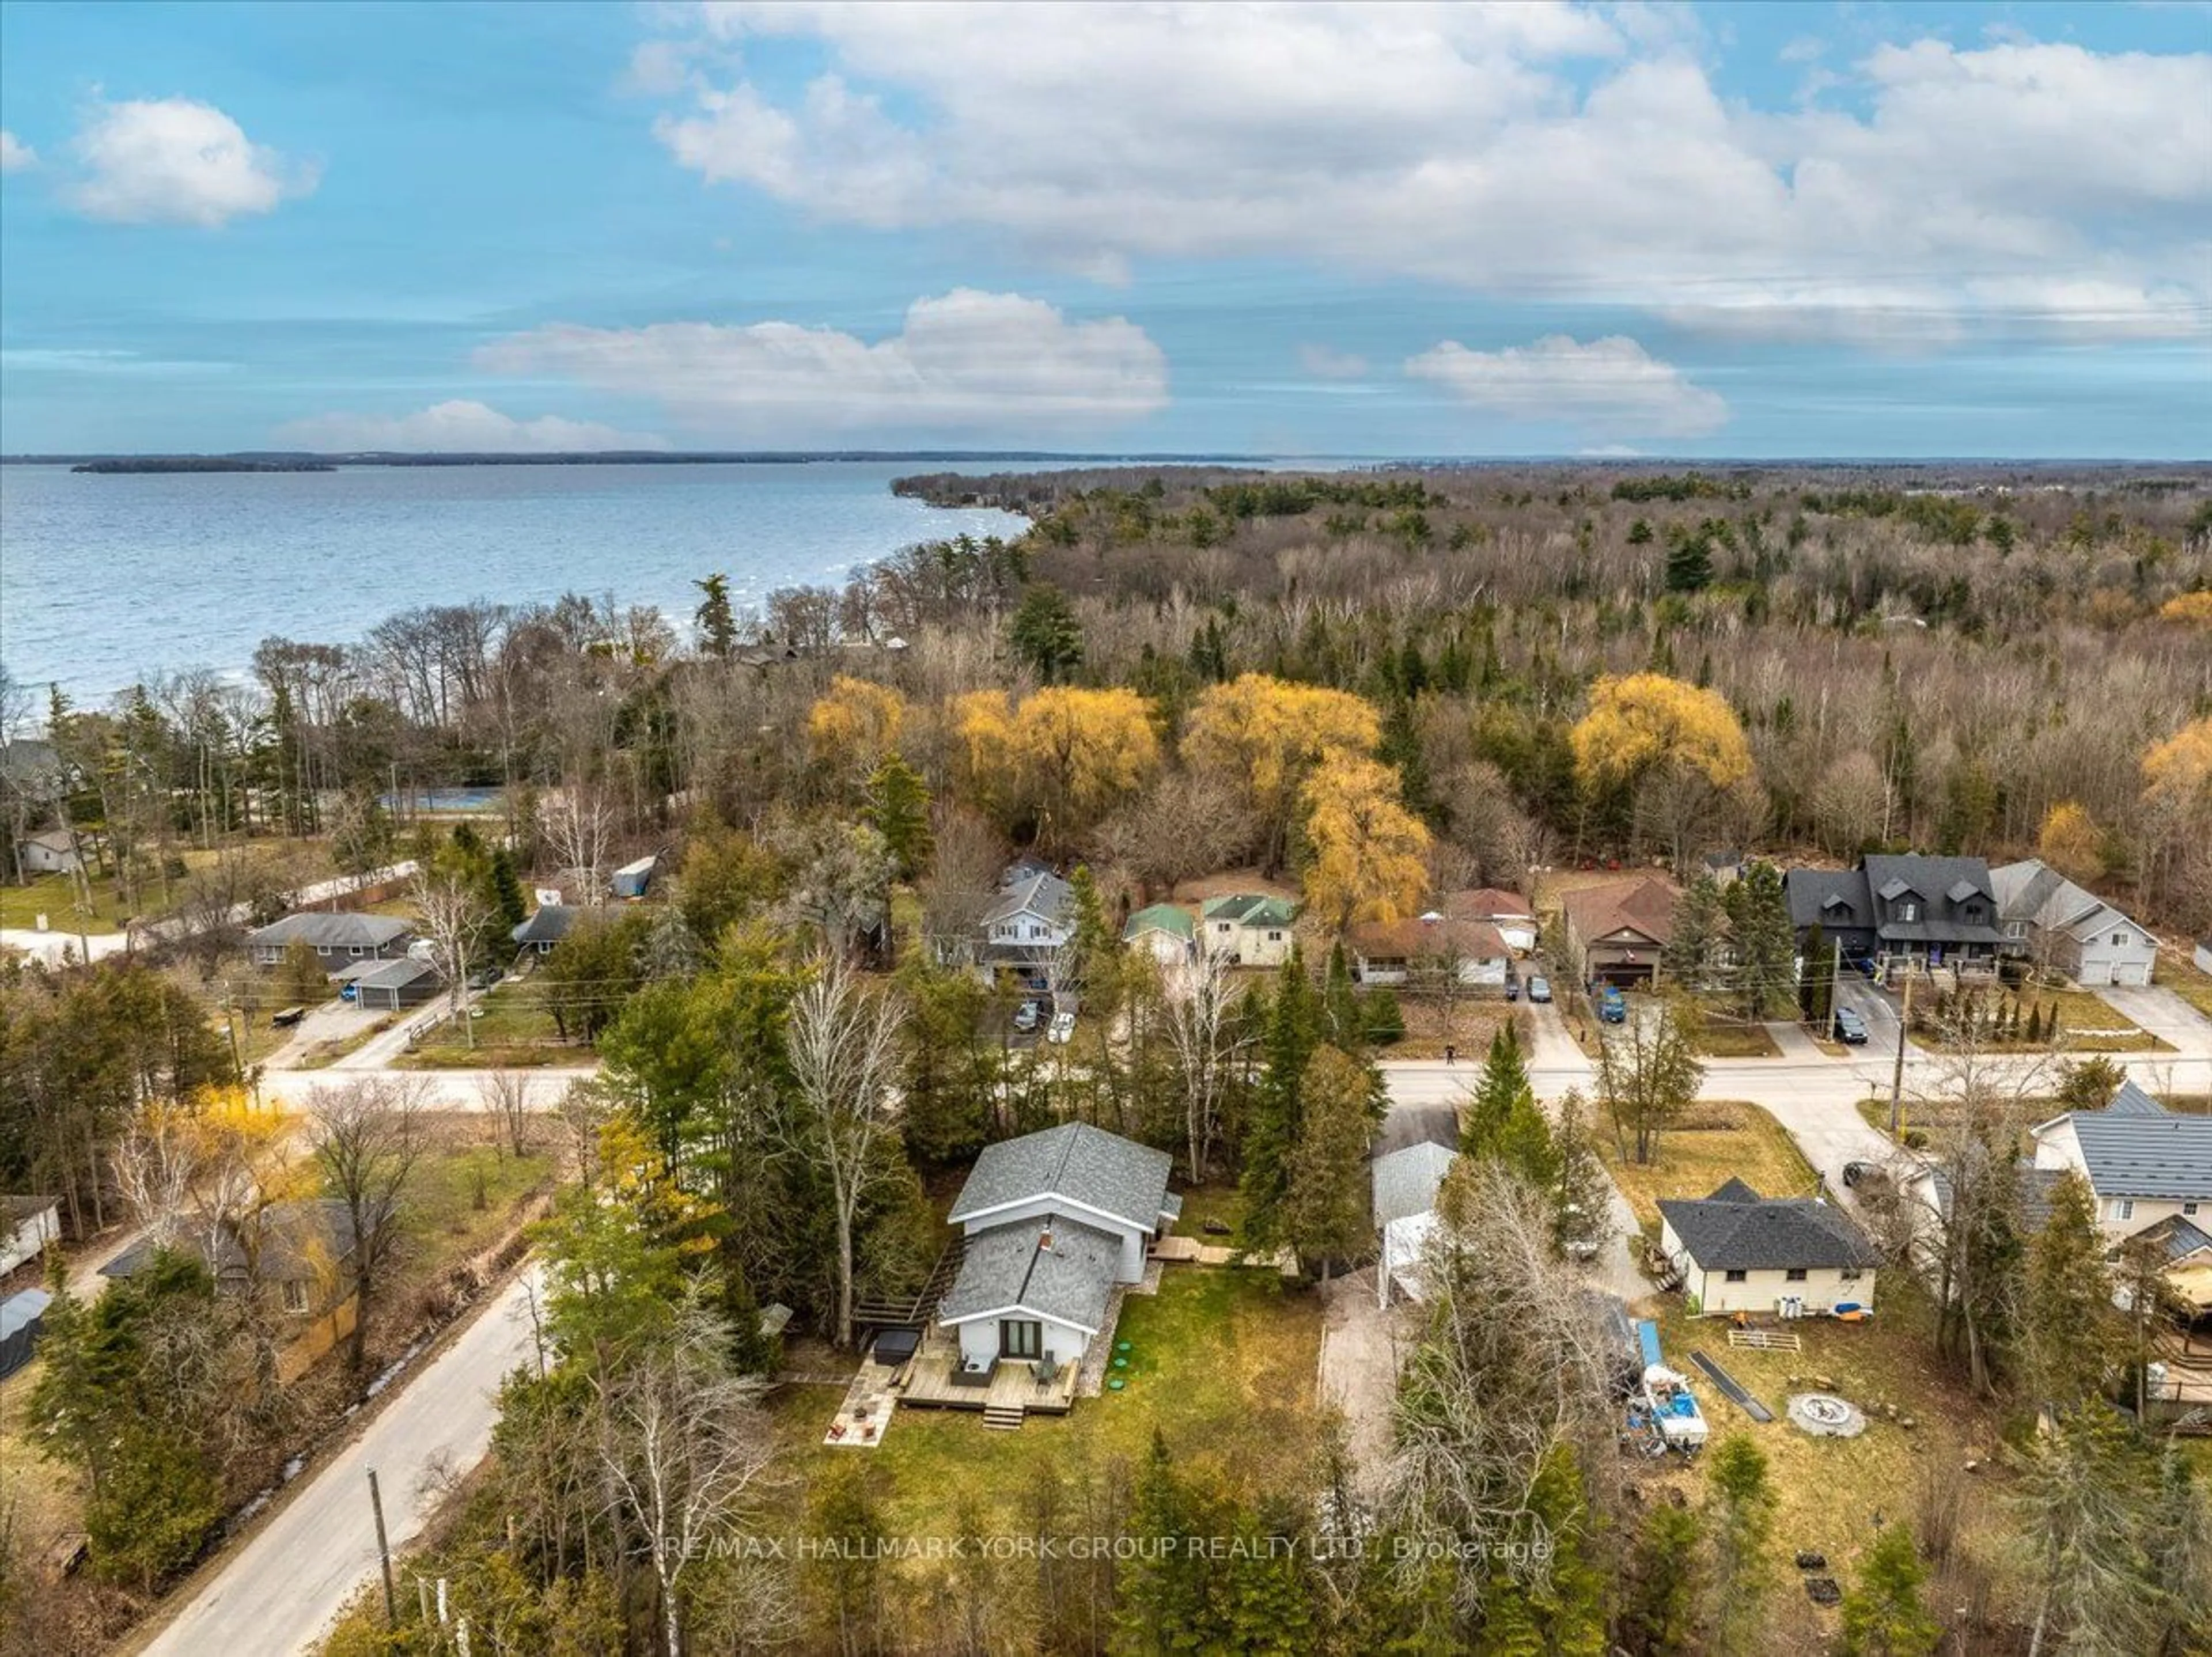 Lakeview for 500 Mapleview Dr, Innisfil Ontario L9S 3A5